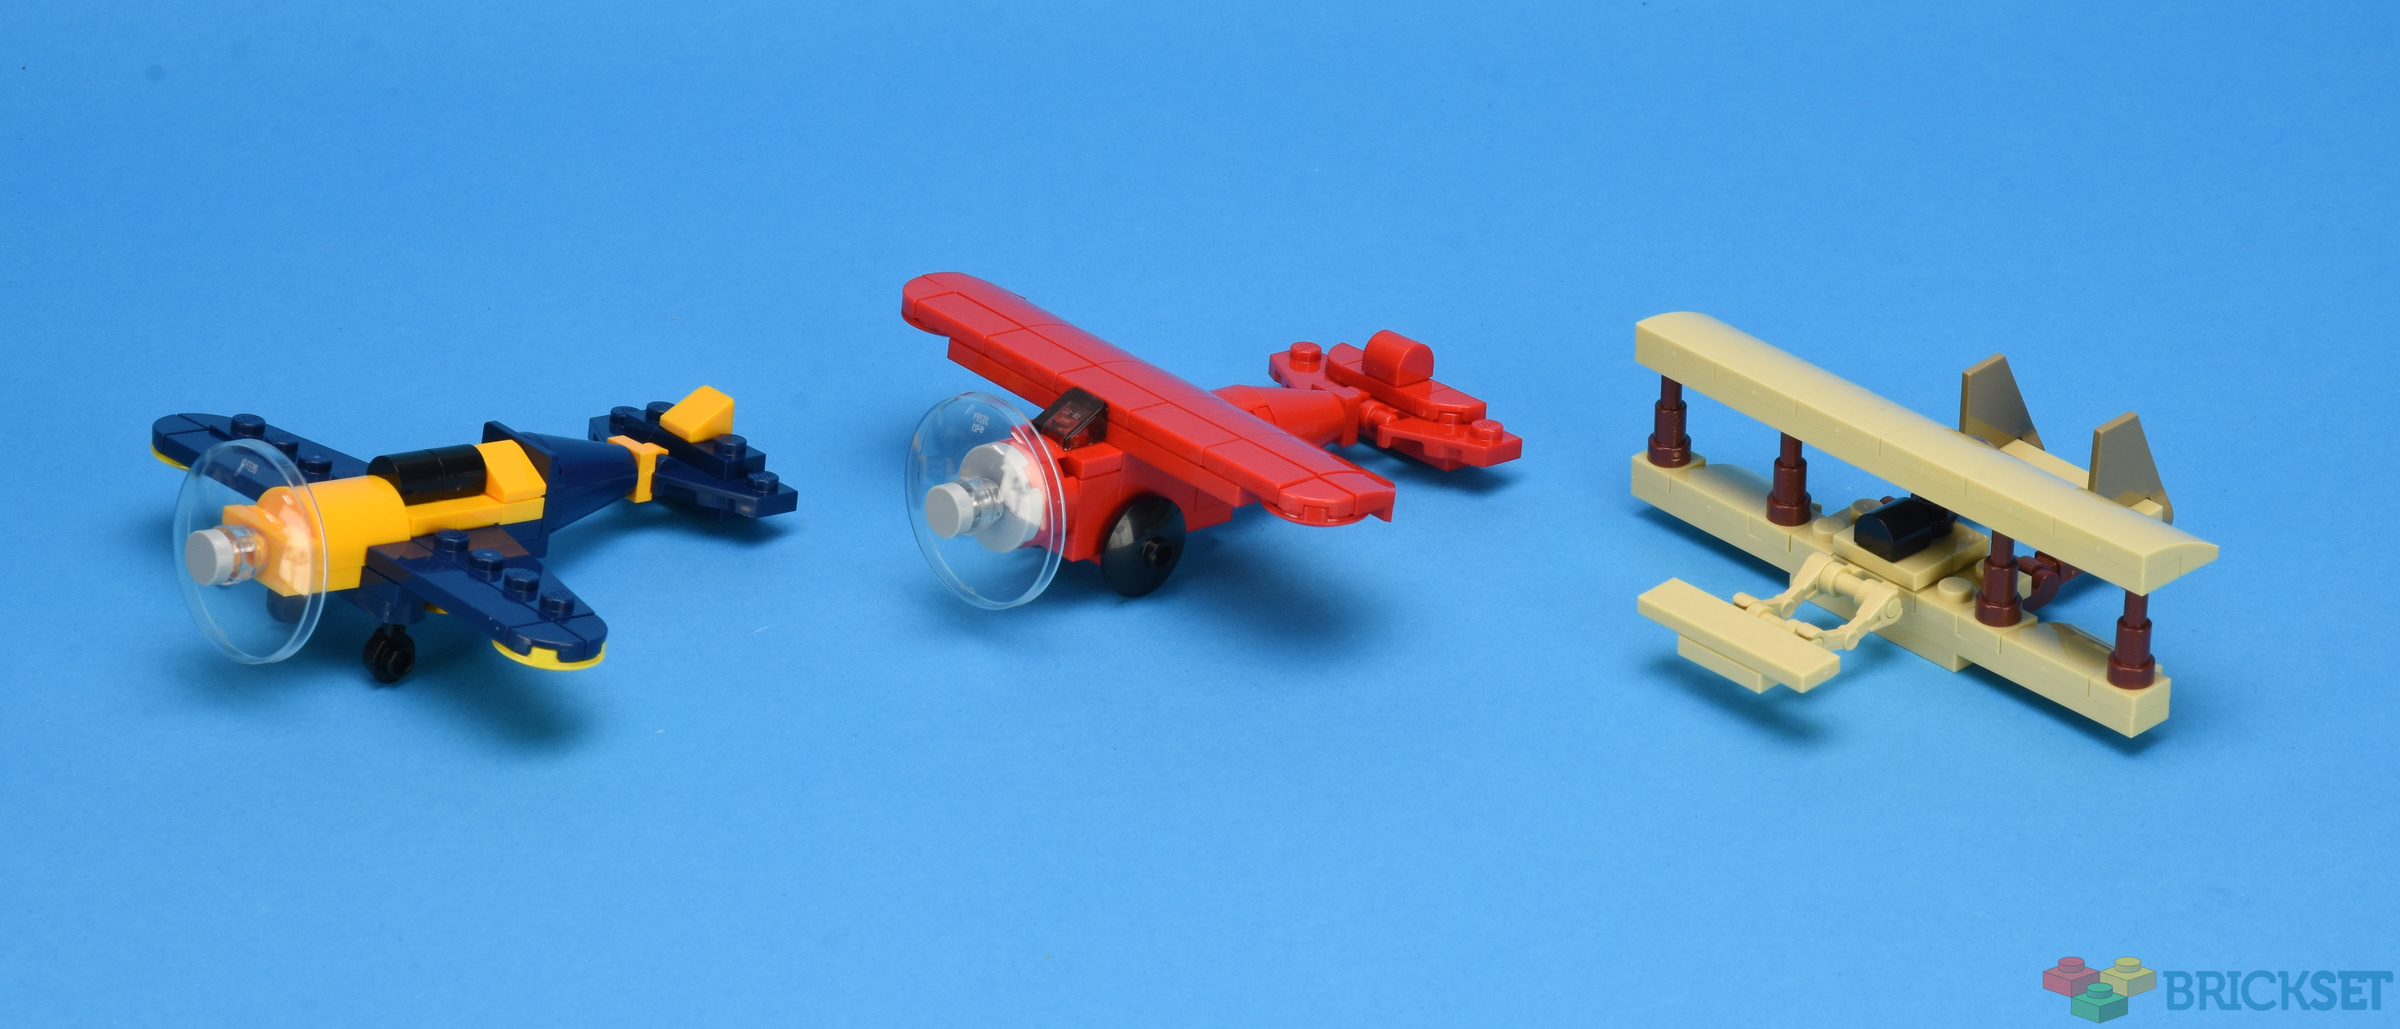 History of Flight in LEGO (by My LEGO - Beyond the Brick